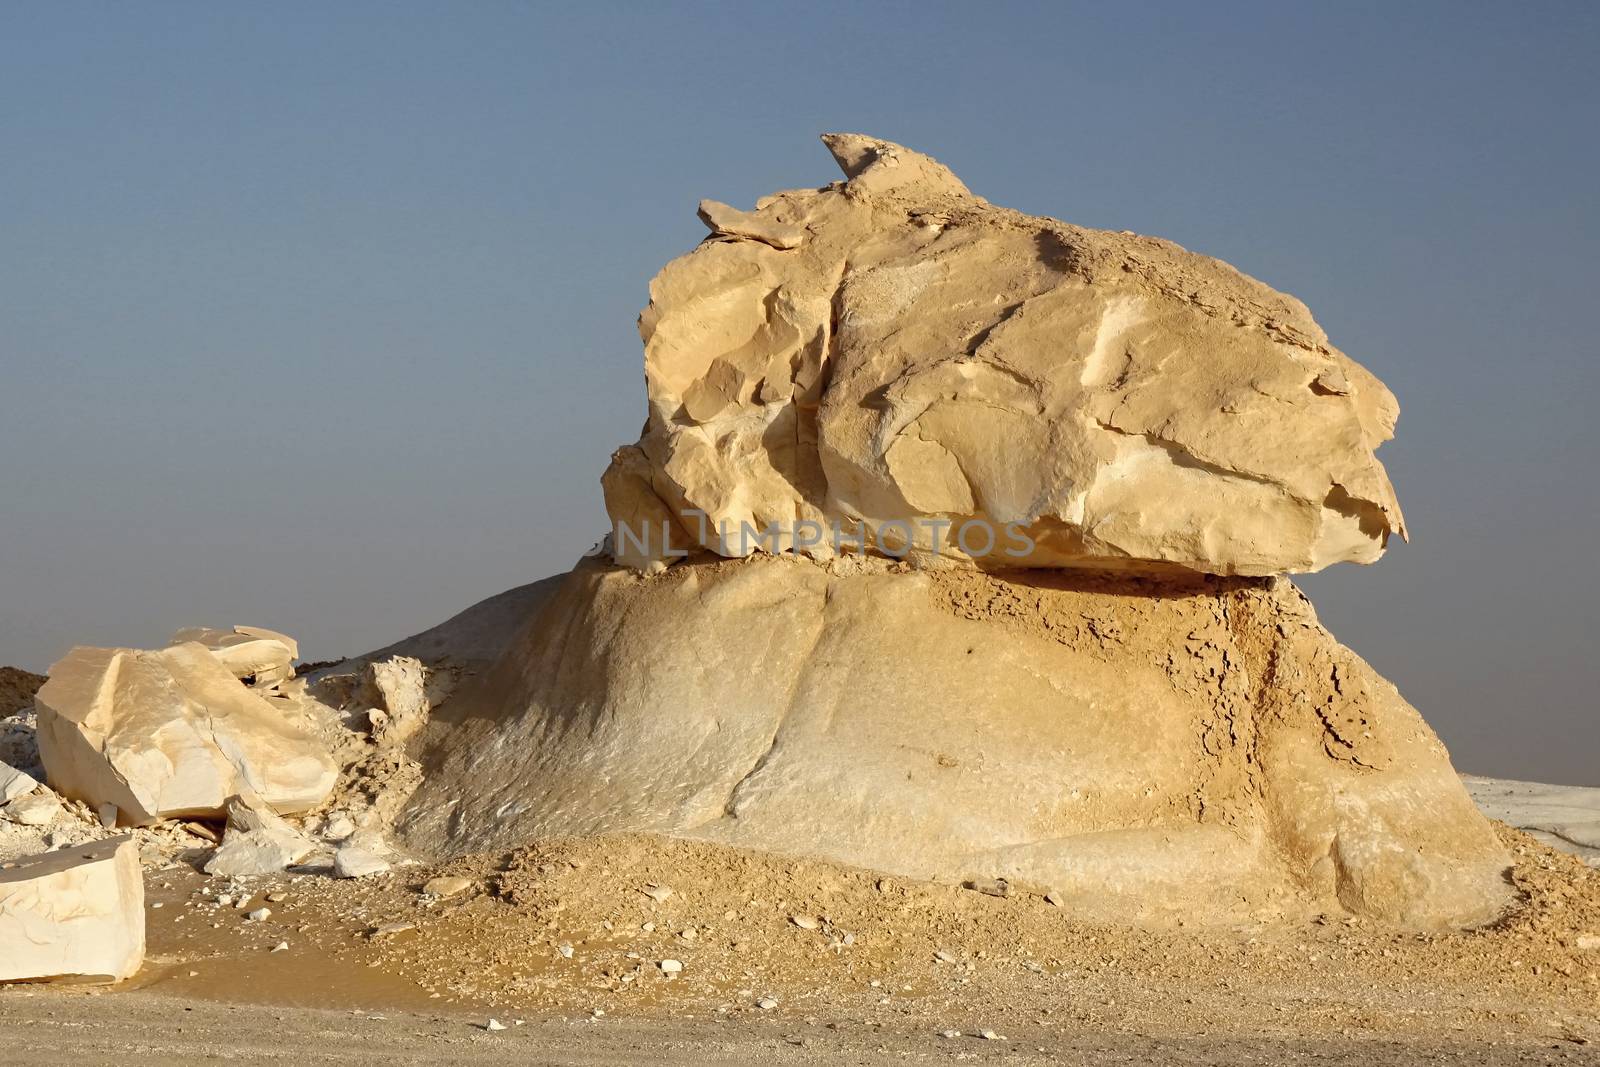  the Rock formations at the Western White Desert National Park of Egypt